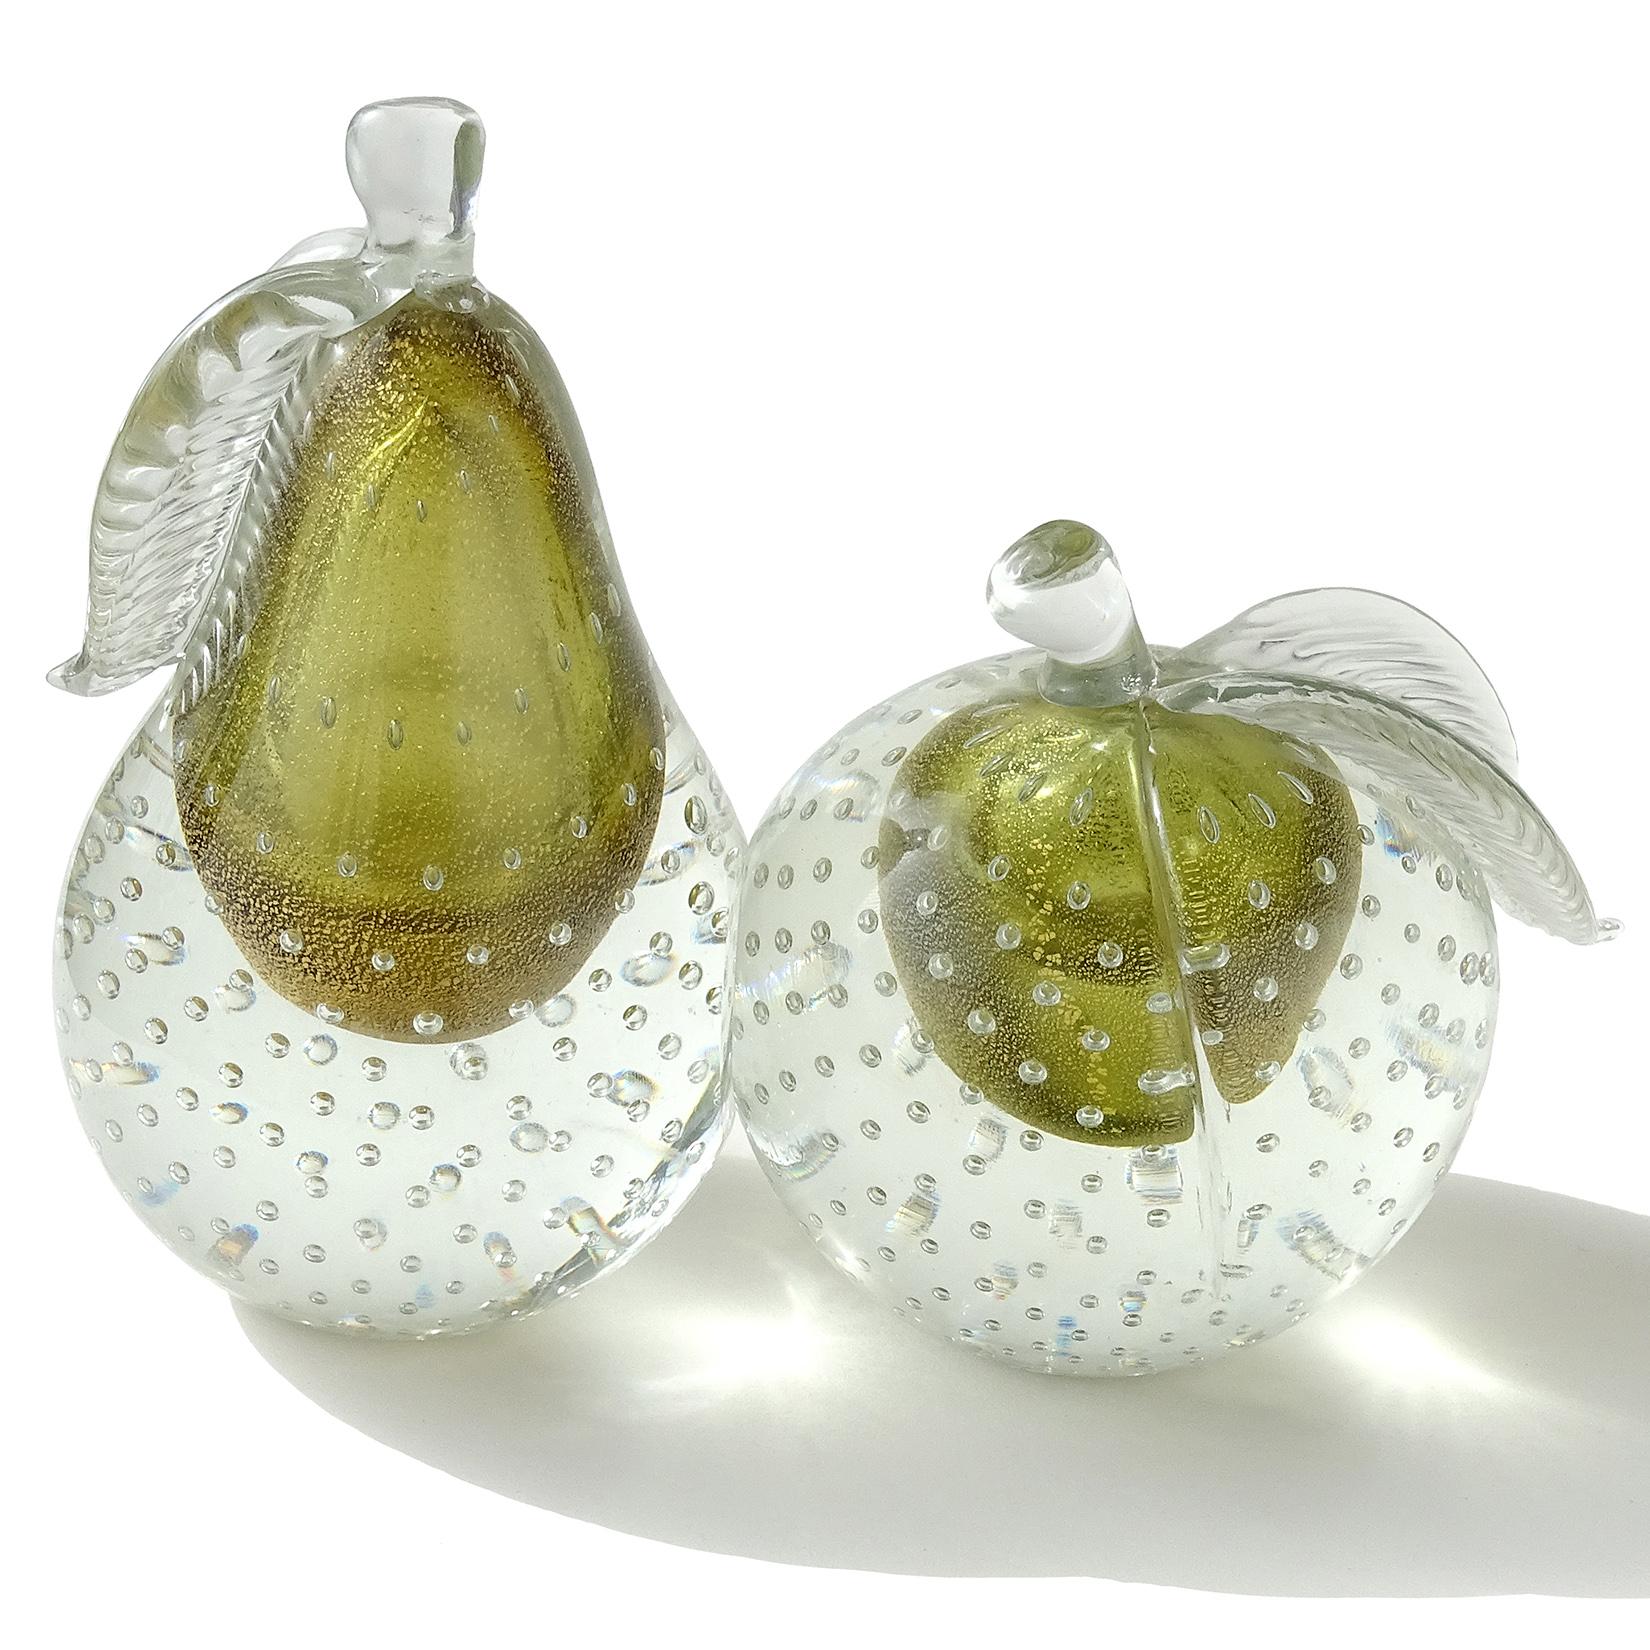 Beautiful Murano hand blown Sommerso olive green, controlled bubbles and gold flecks Italian art glass pear and apple bookends. Documented to designer Alfredo Barbini, circa 1950s-1960s and published in his vintage catalog. The pieces are very